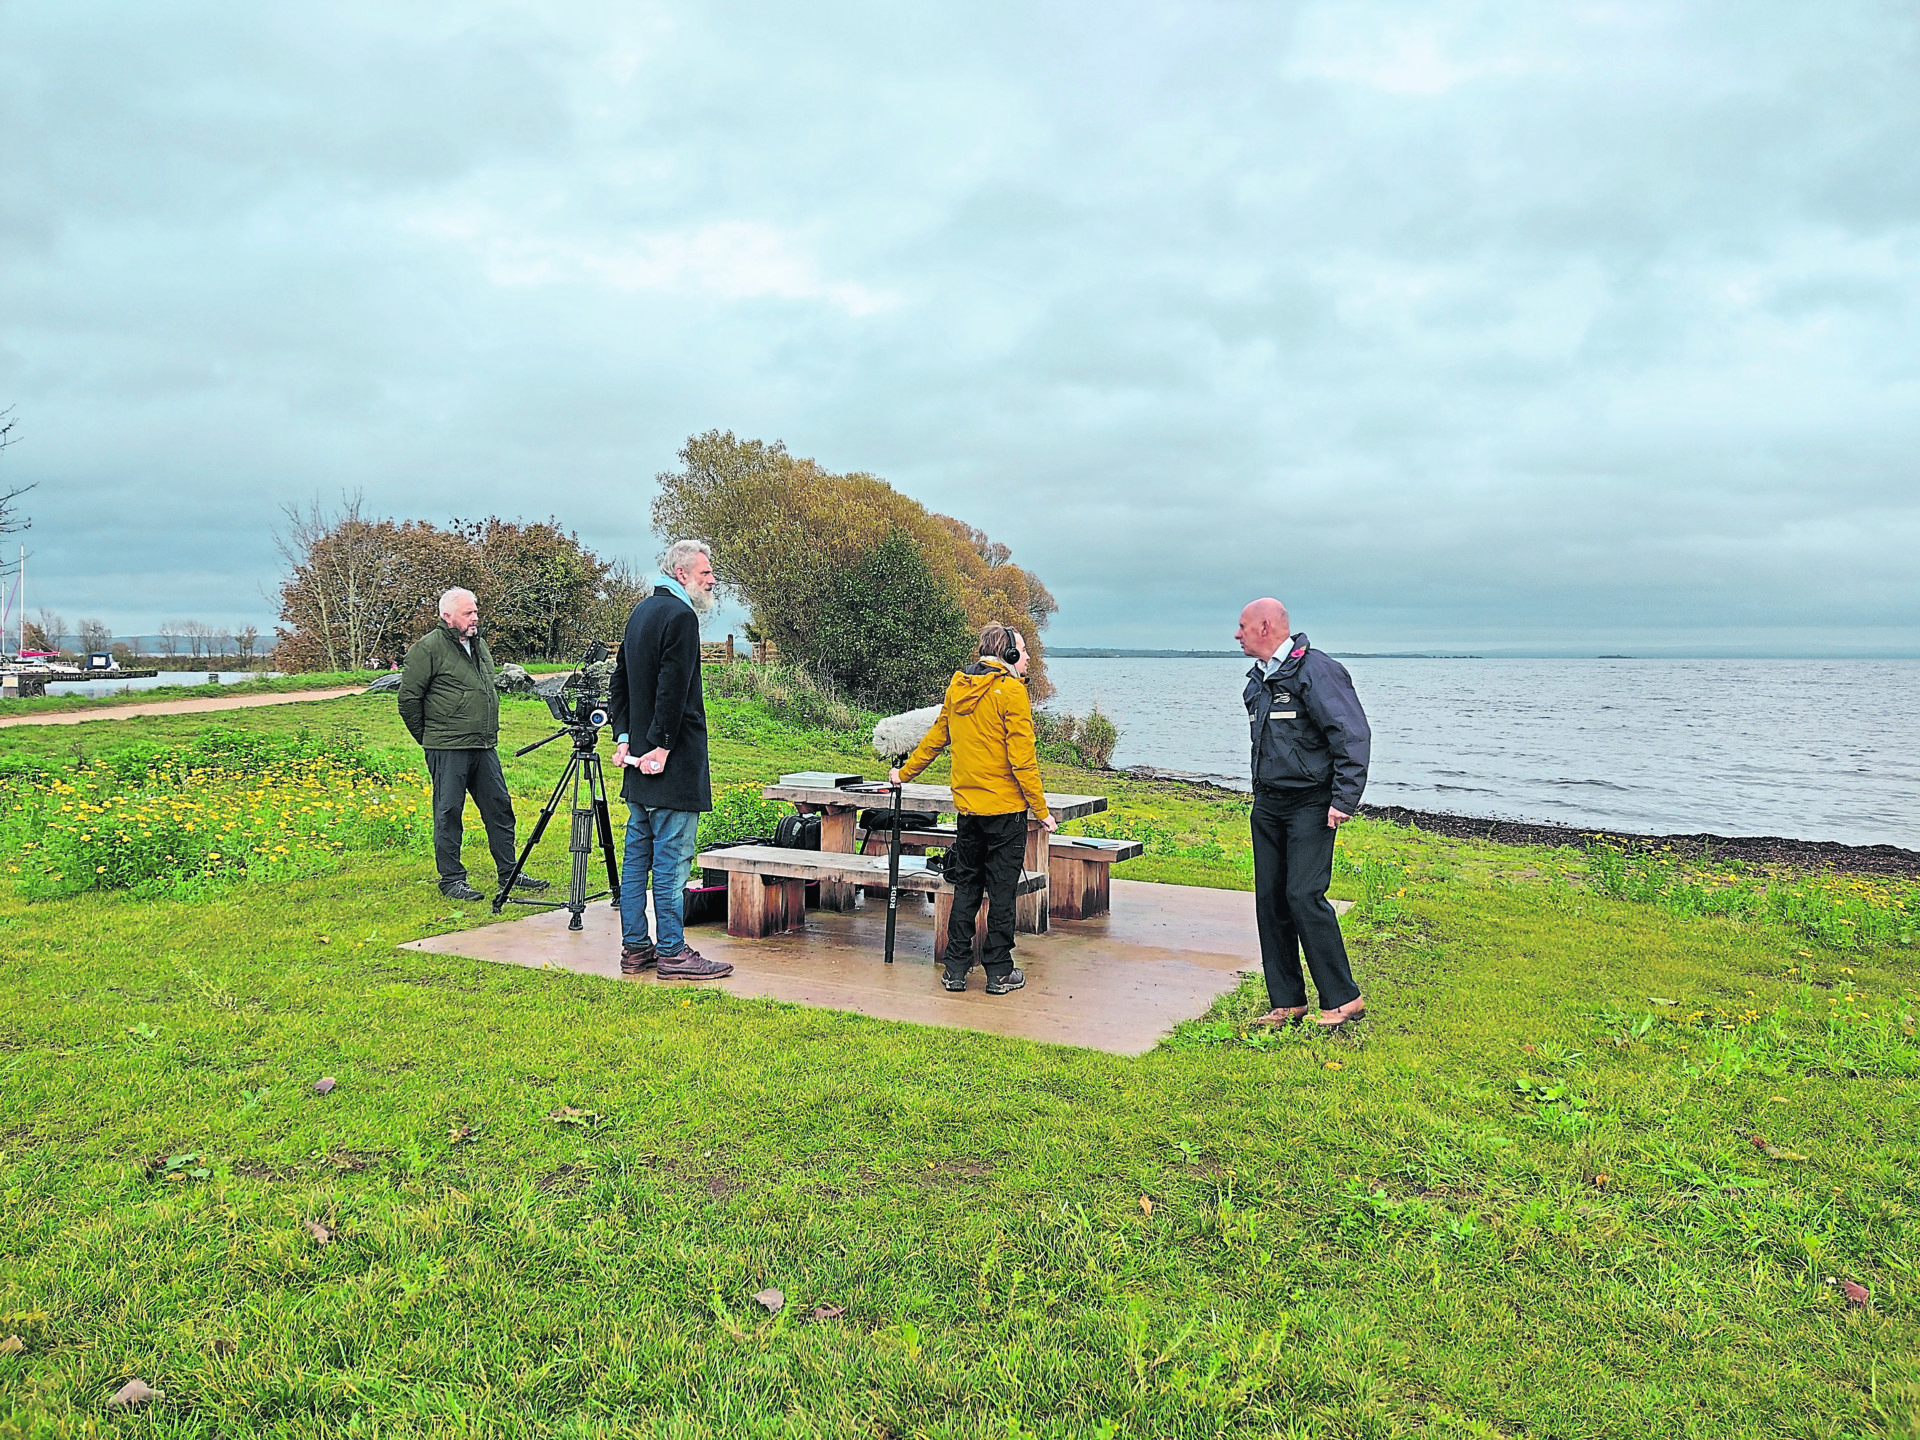 New enviromental project on Coney Island as Lough Neagh showcased in film